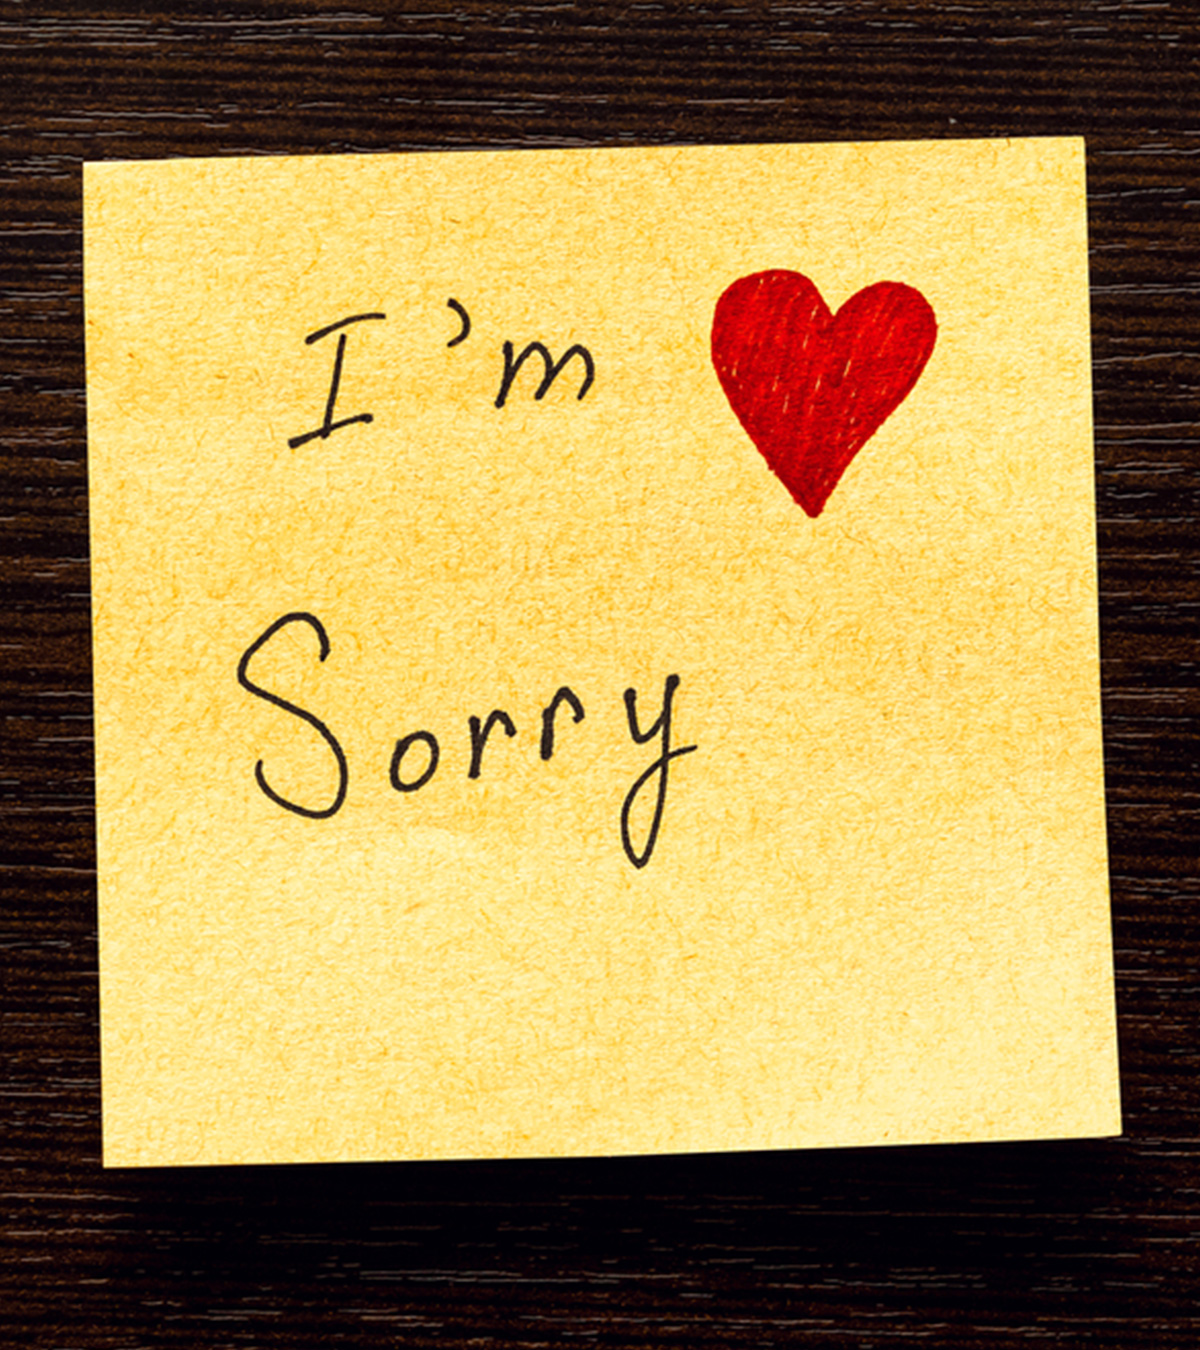 How To Apologize To Your Girlfriend: 25+ Simple Ways